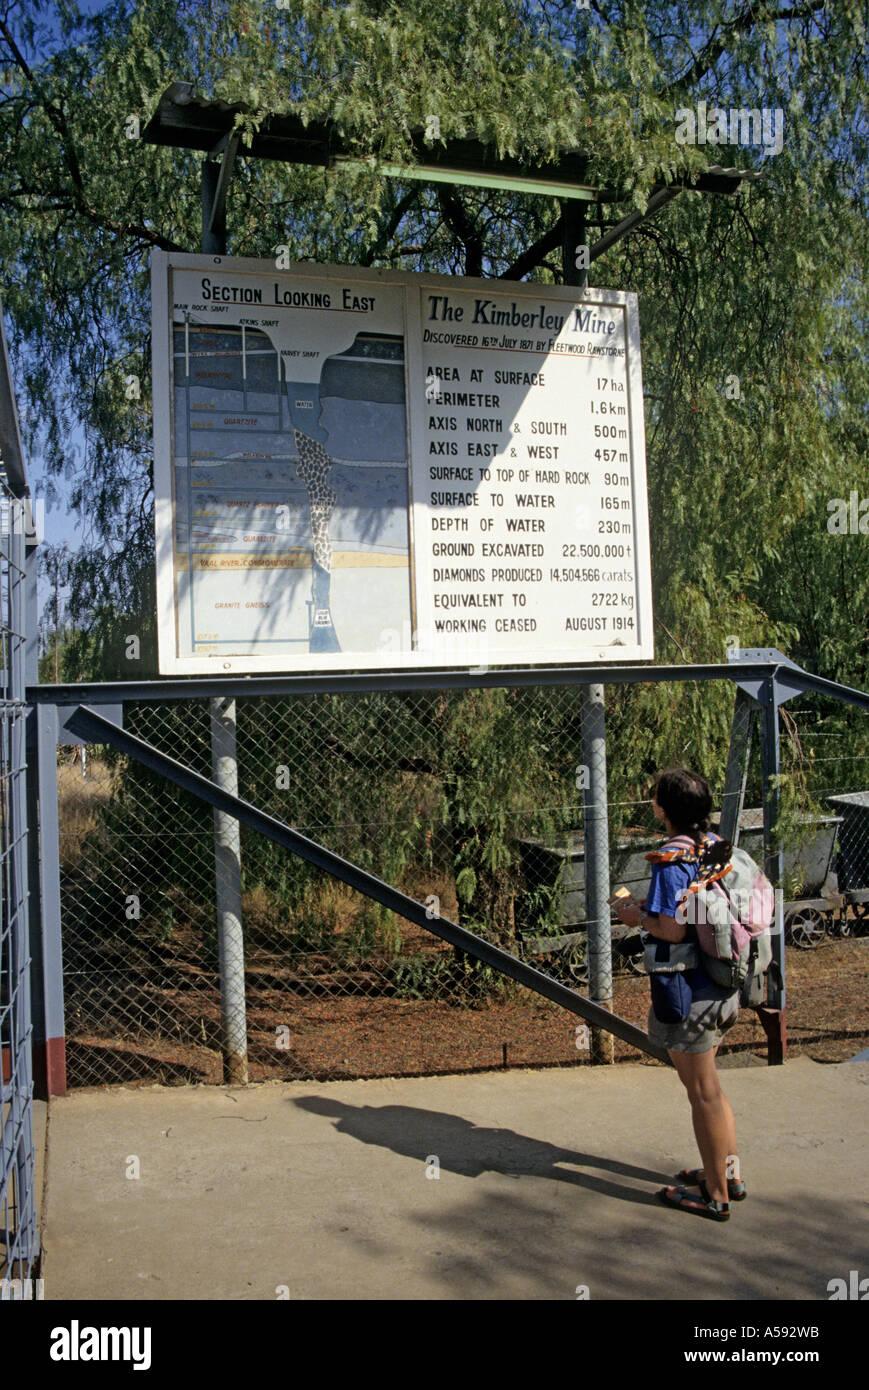 Female tourist reading sign at the Big Hole and Kimberley Mine Museum for diamond mining Kimberley South Africa Stock Photo